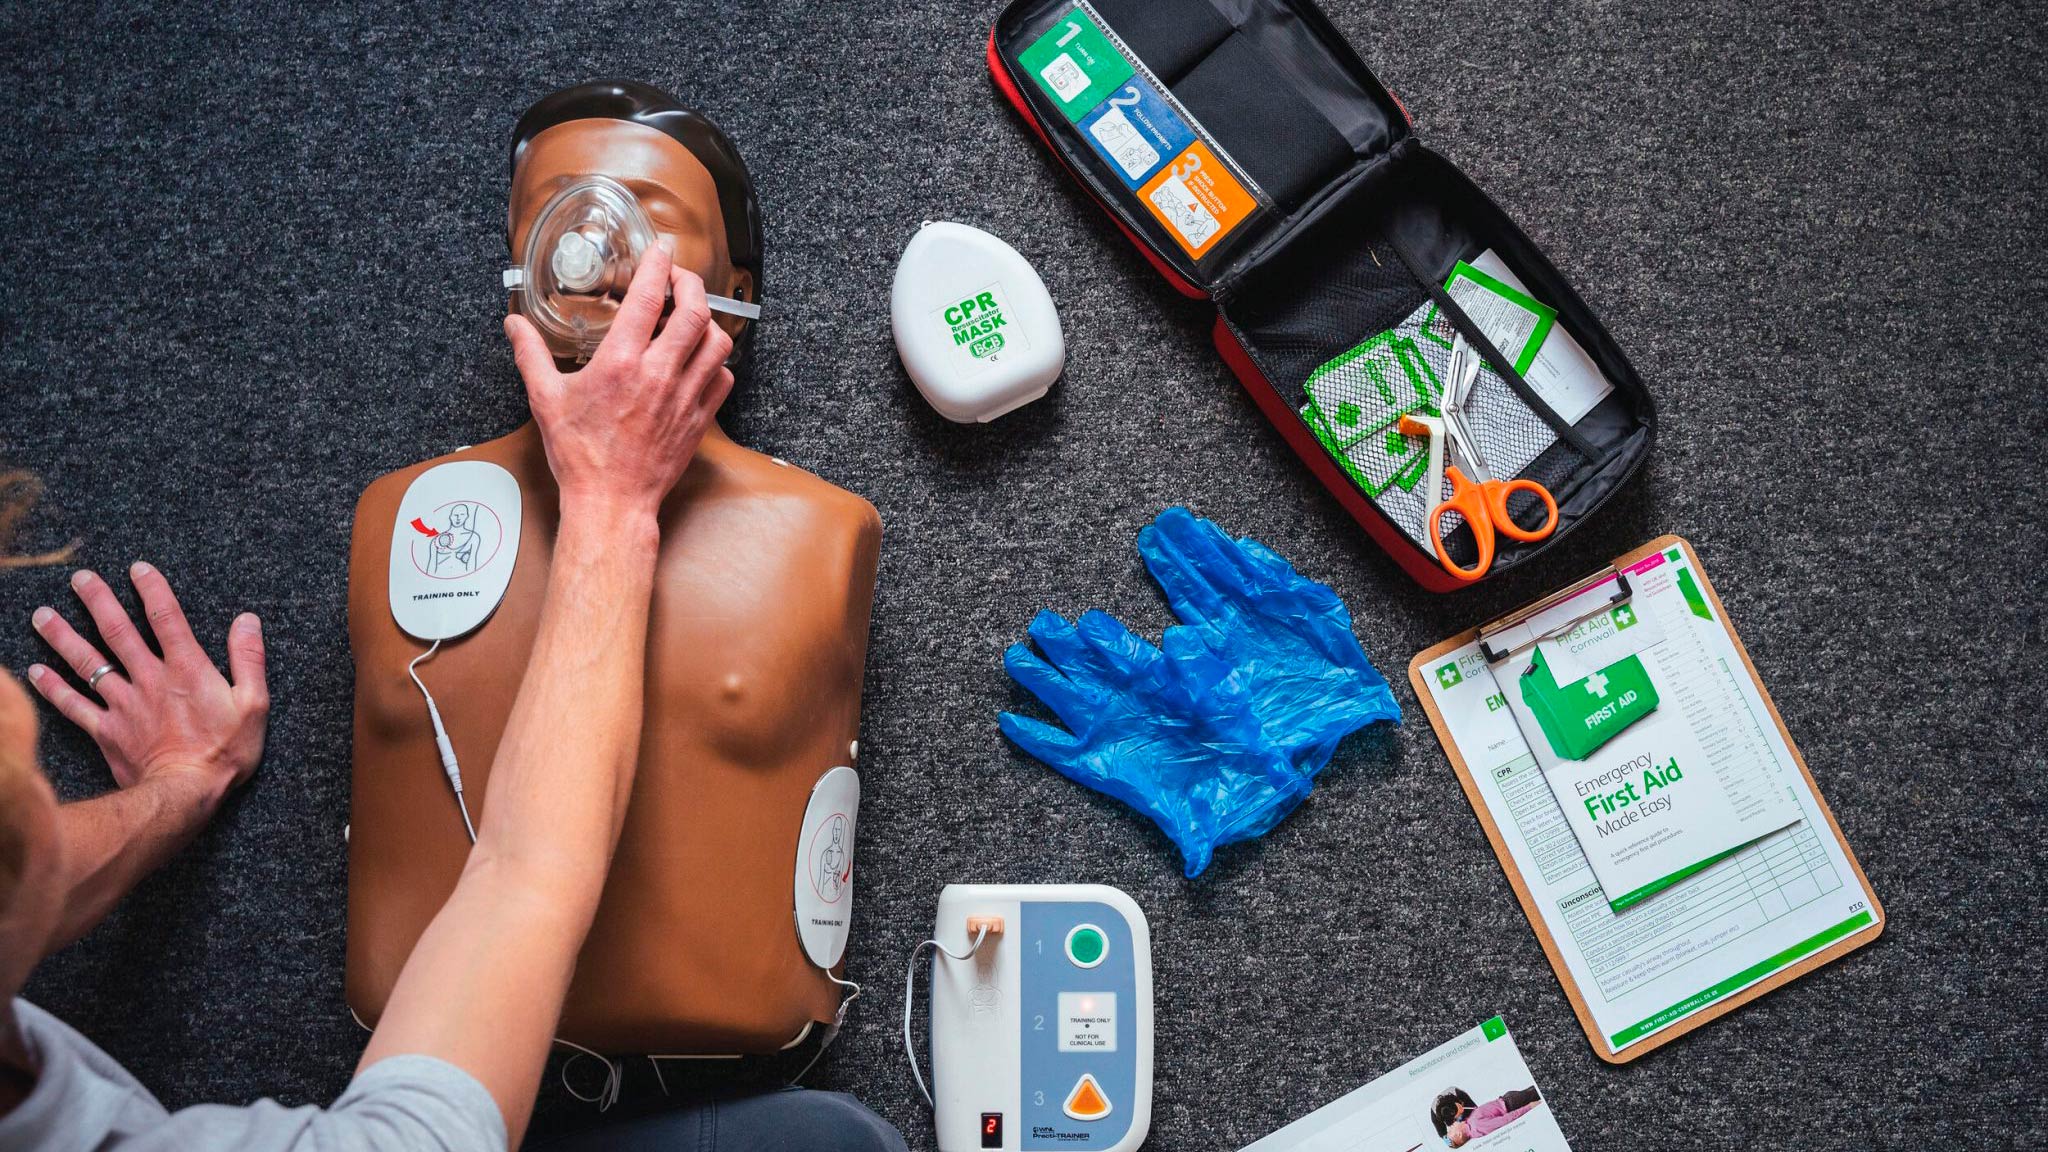 Emergency First Aid at Work – 1 Day Course